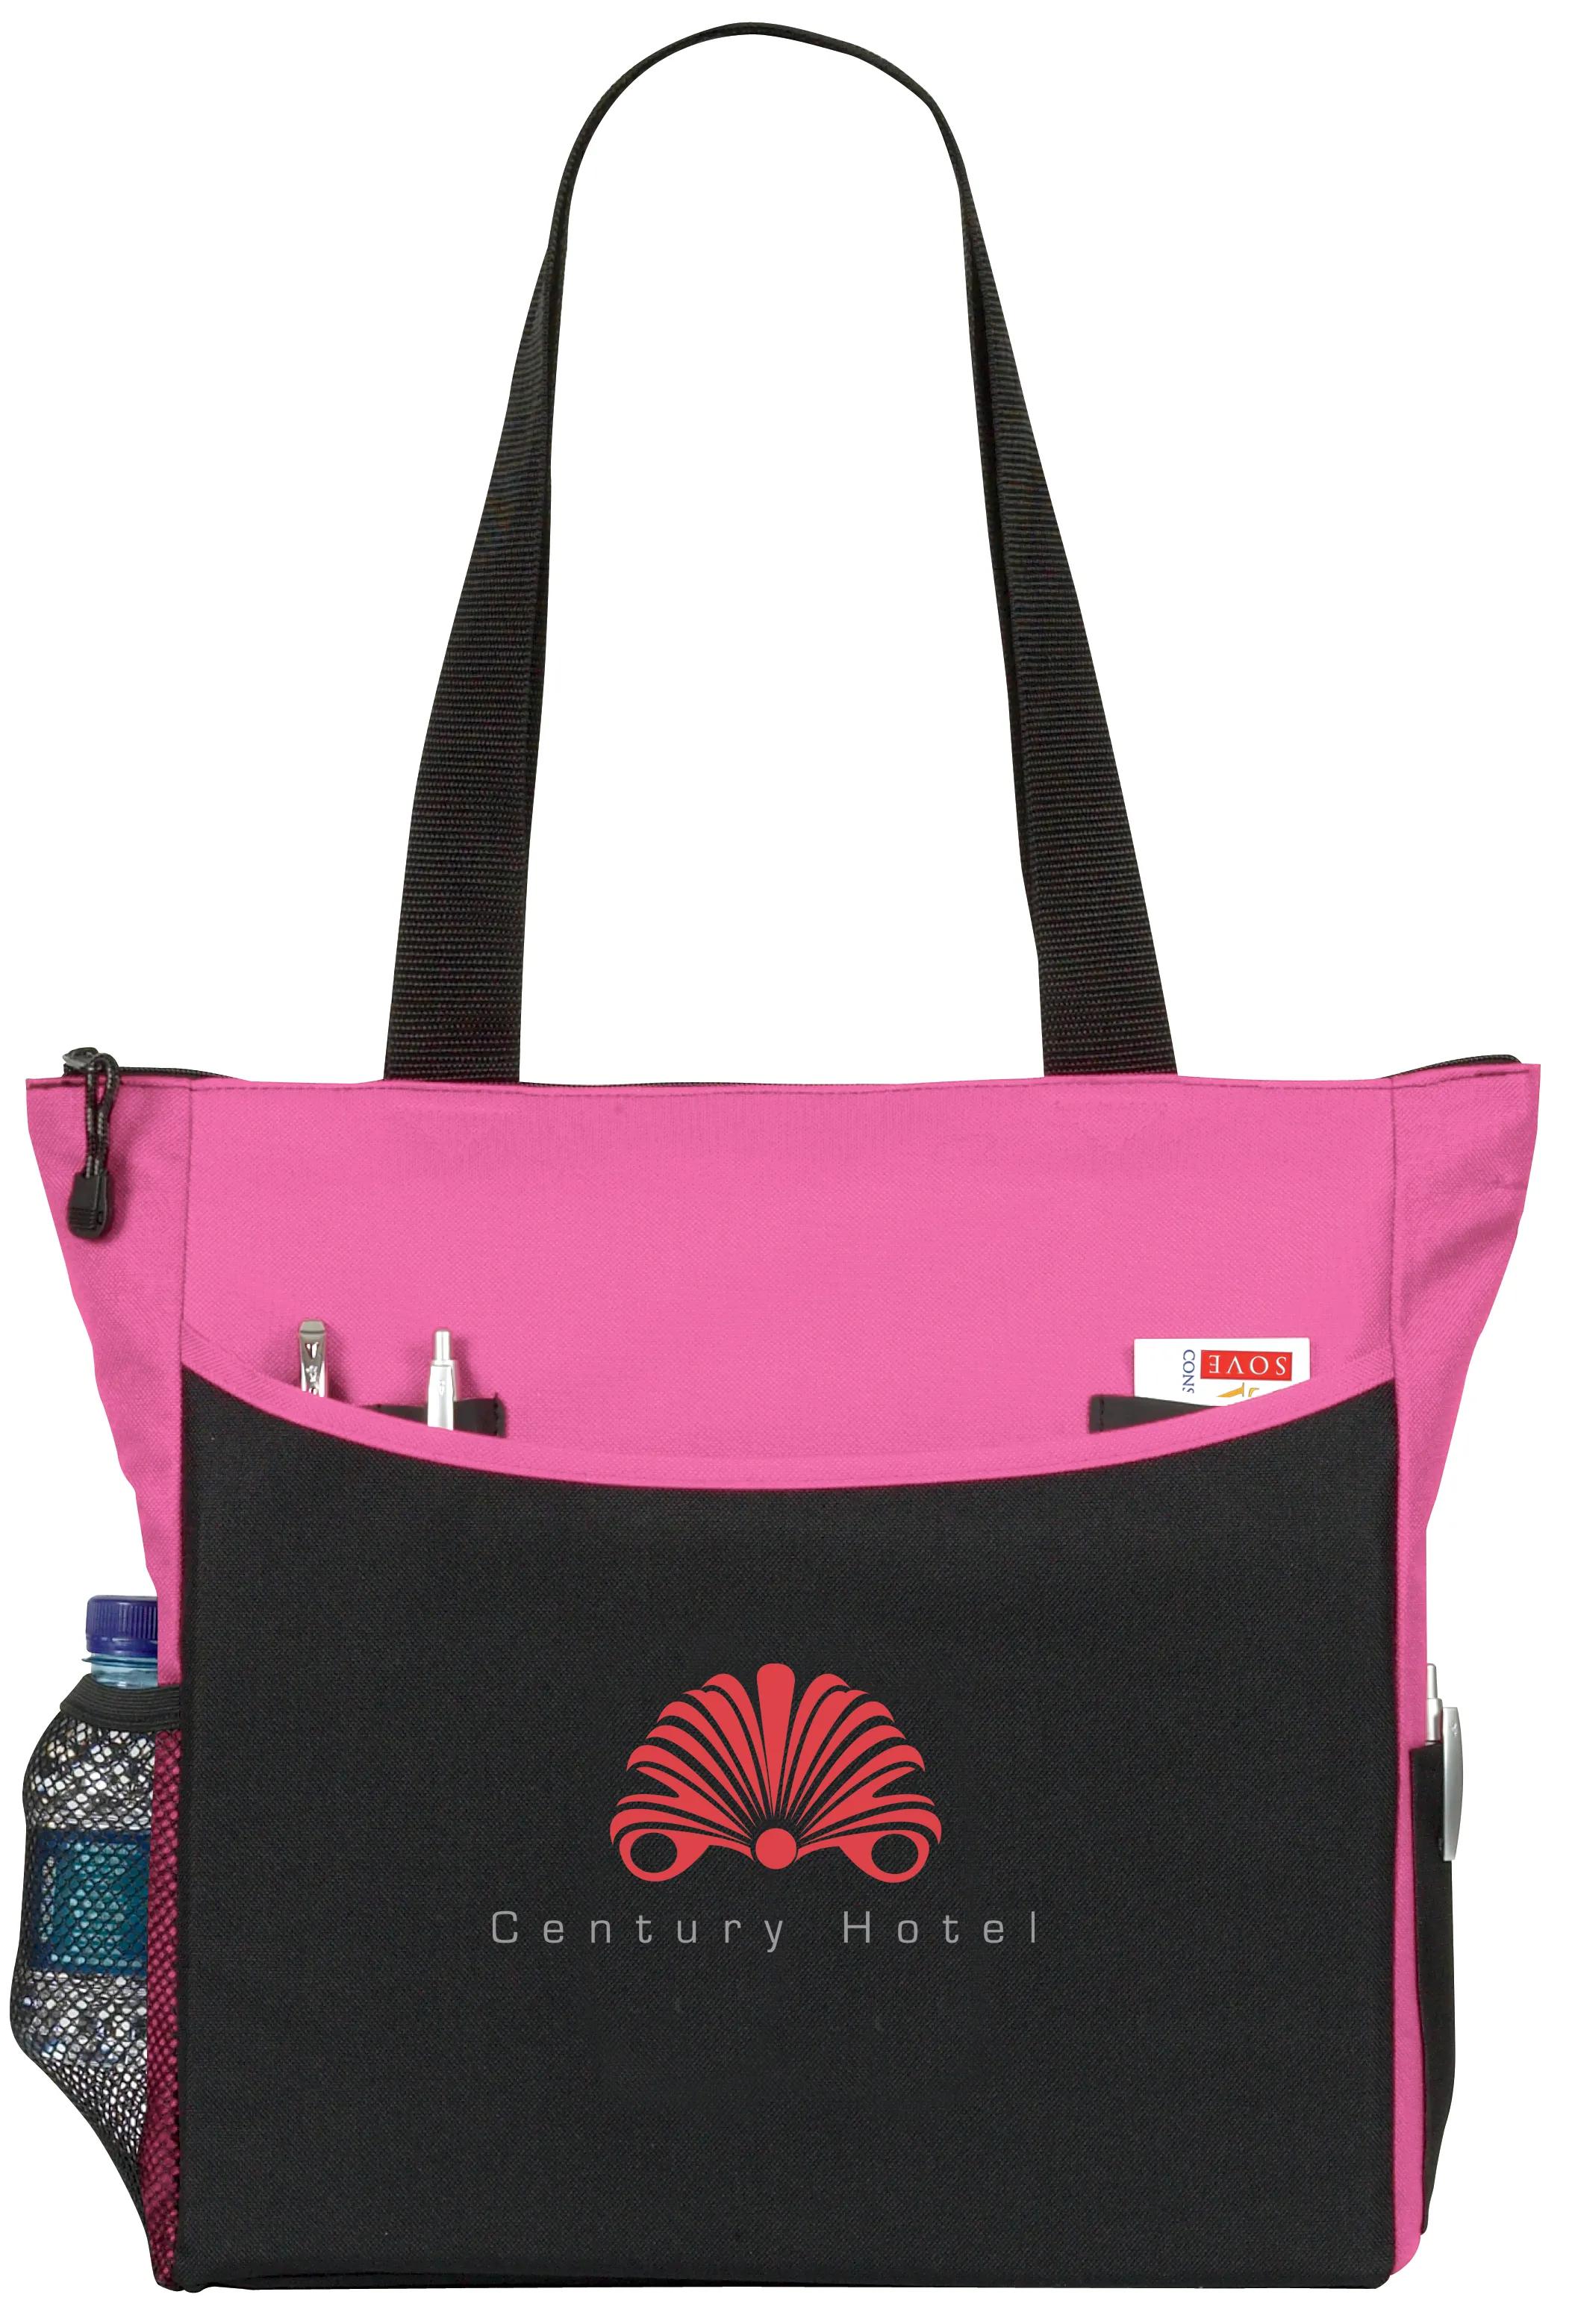 TranSport It Tote 34 of 40